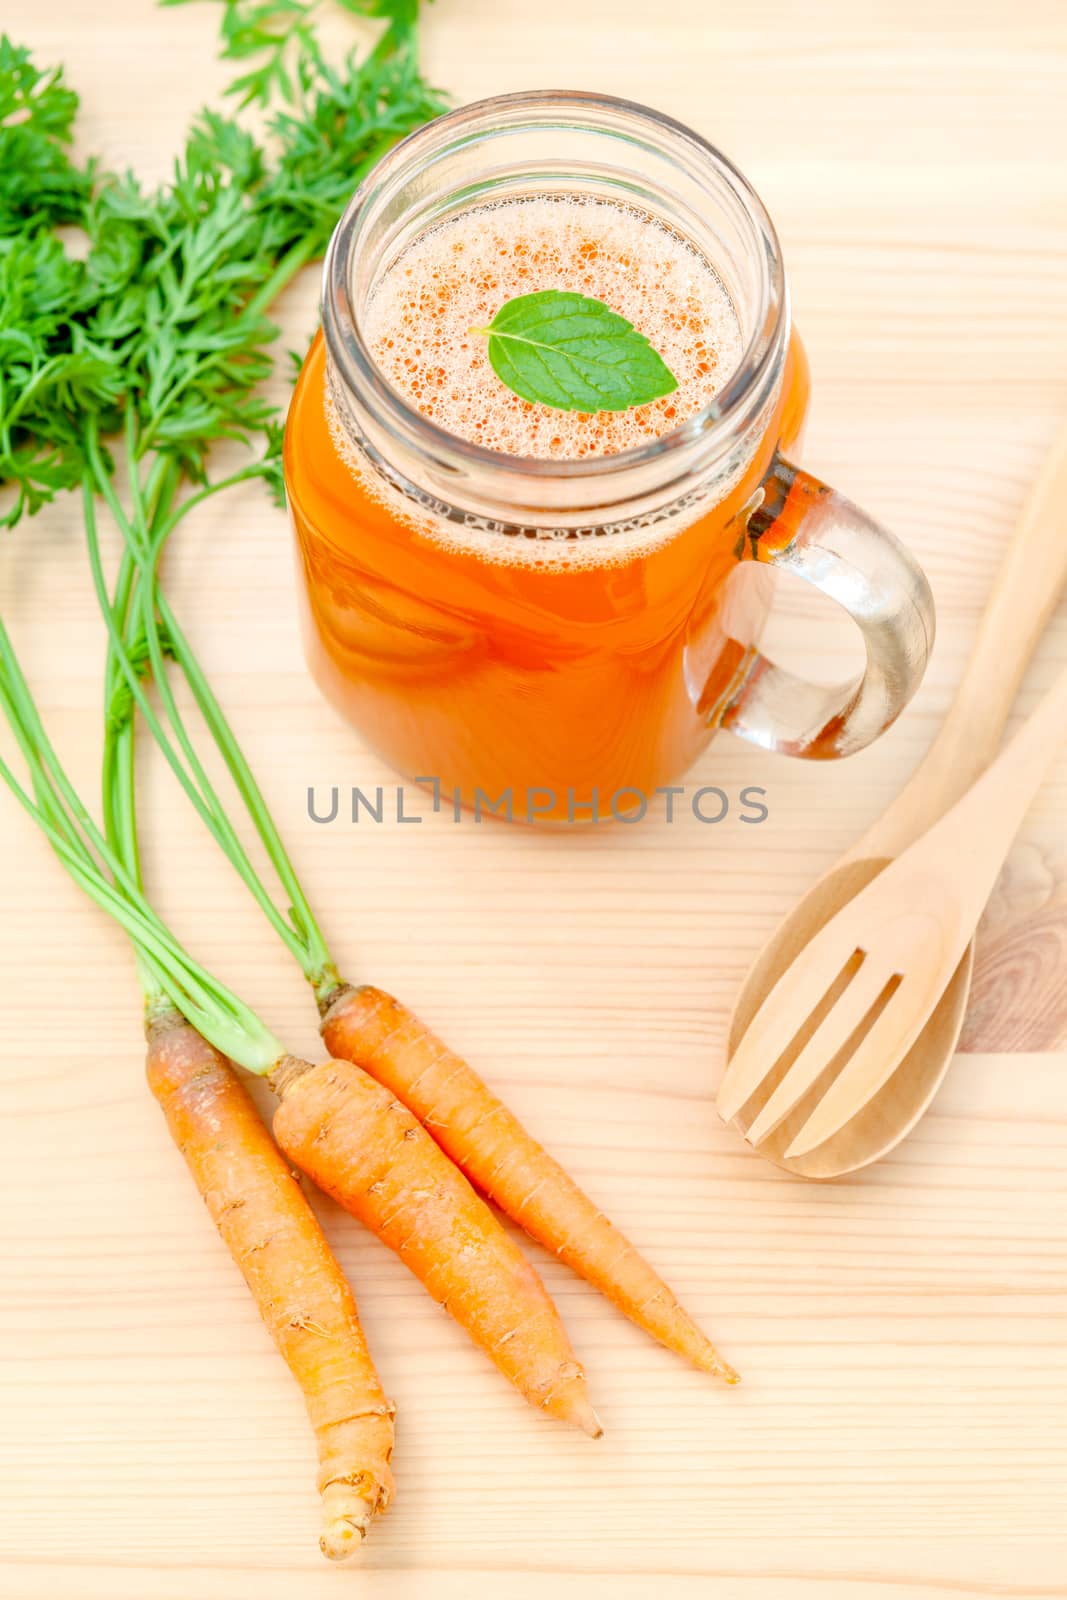 Glasses of carrot juice with carrot roots on wooden background.G by kerdkanno